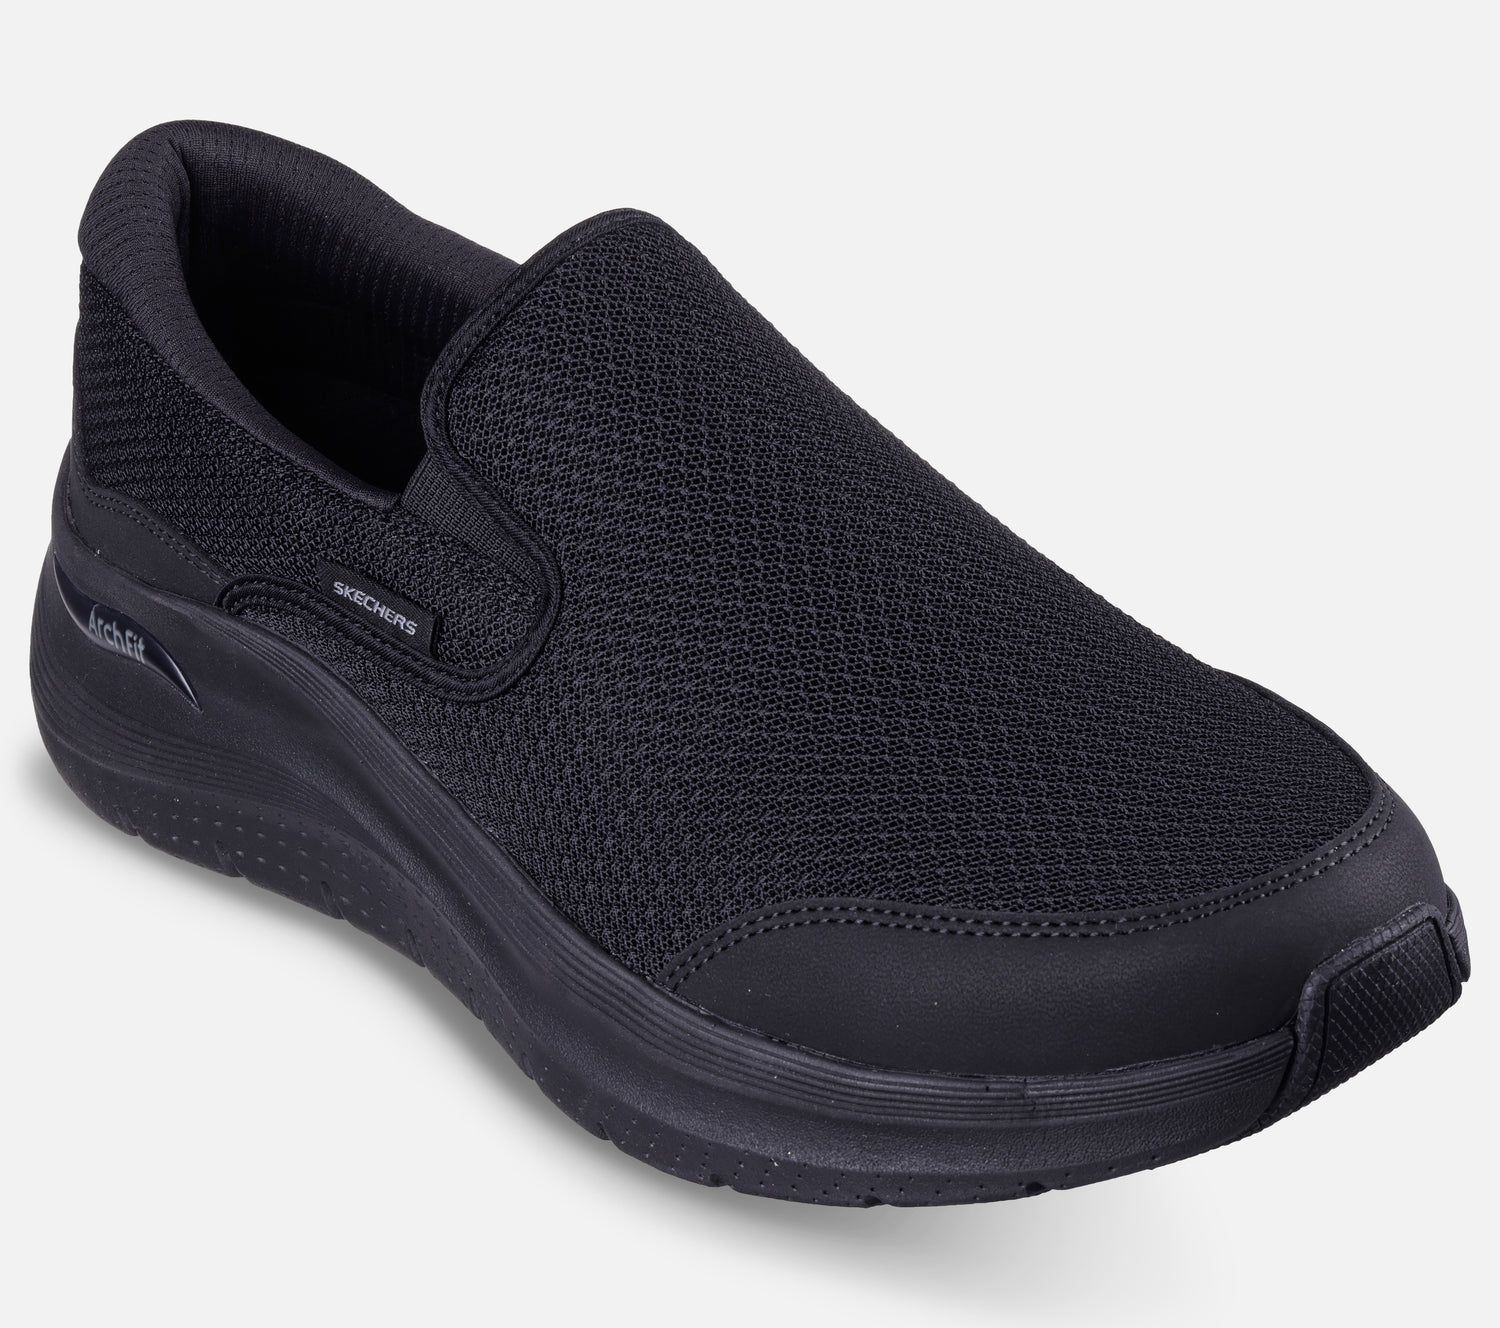 Wide Fit: Arch Fit 2.0 - Vallo Shoe Skechers